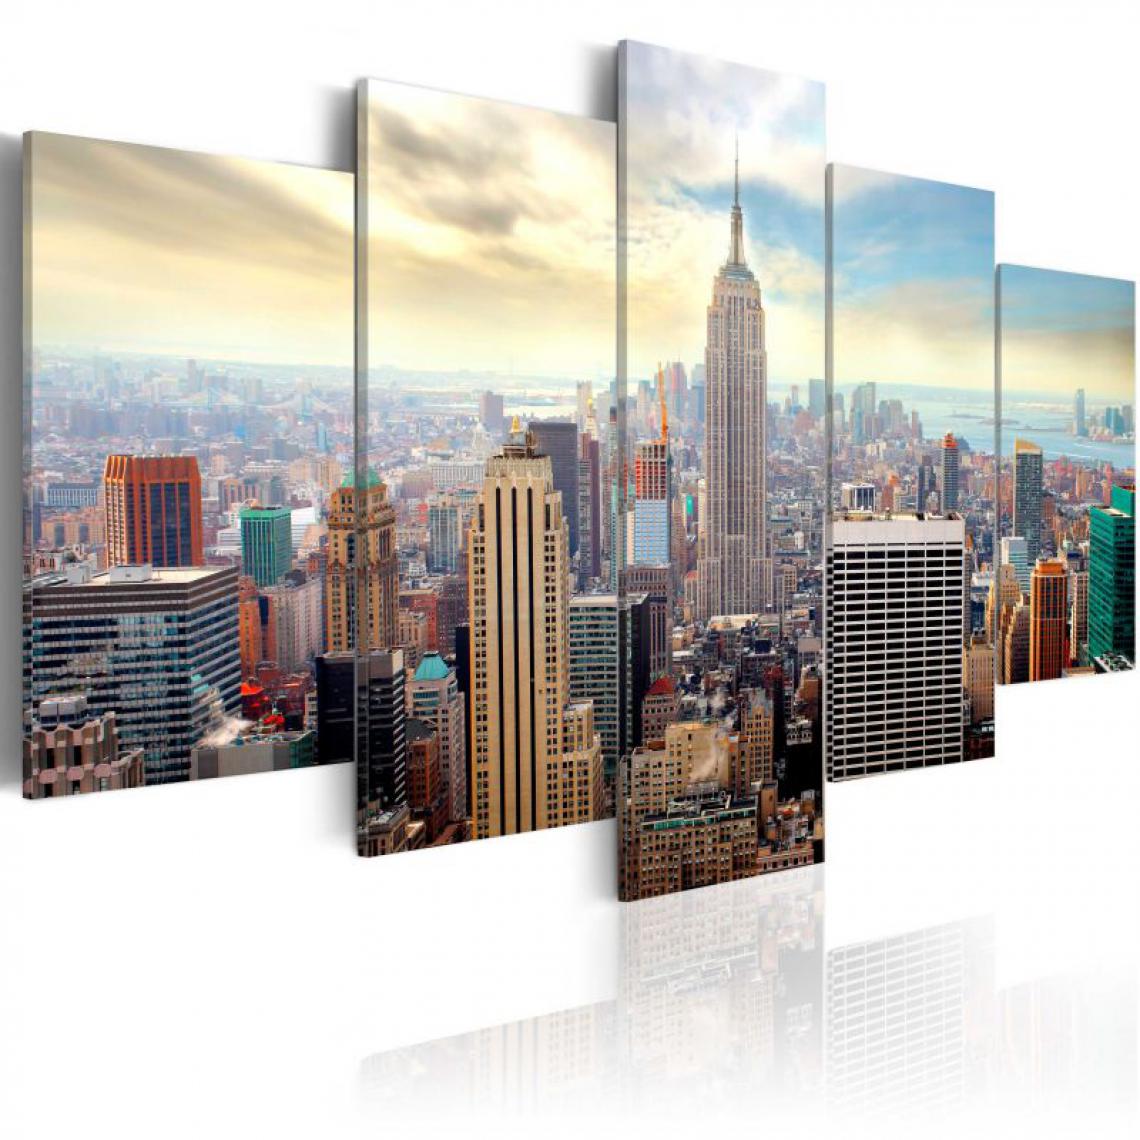 Artgeist - Tableau - Morning in New York City .Taille : 200x100 - Tableaux, peintures